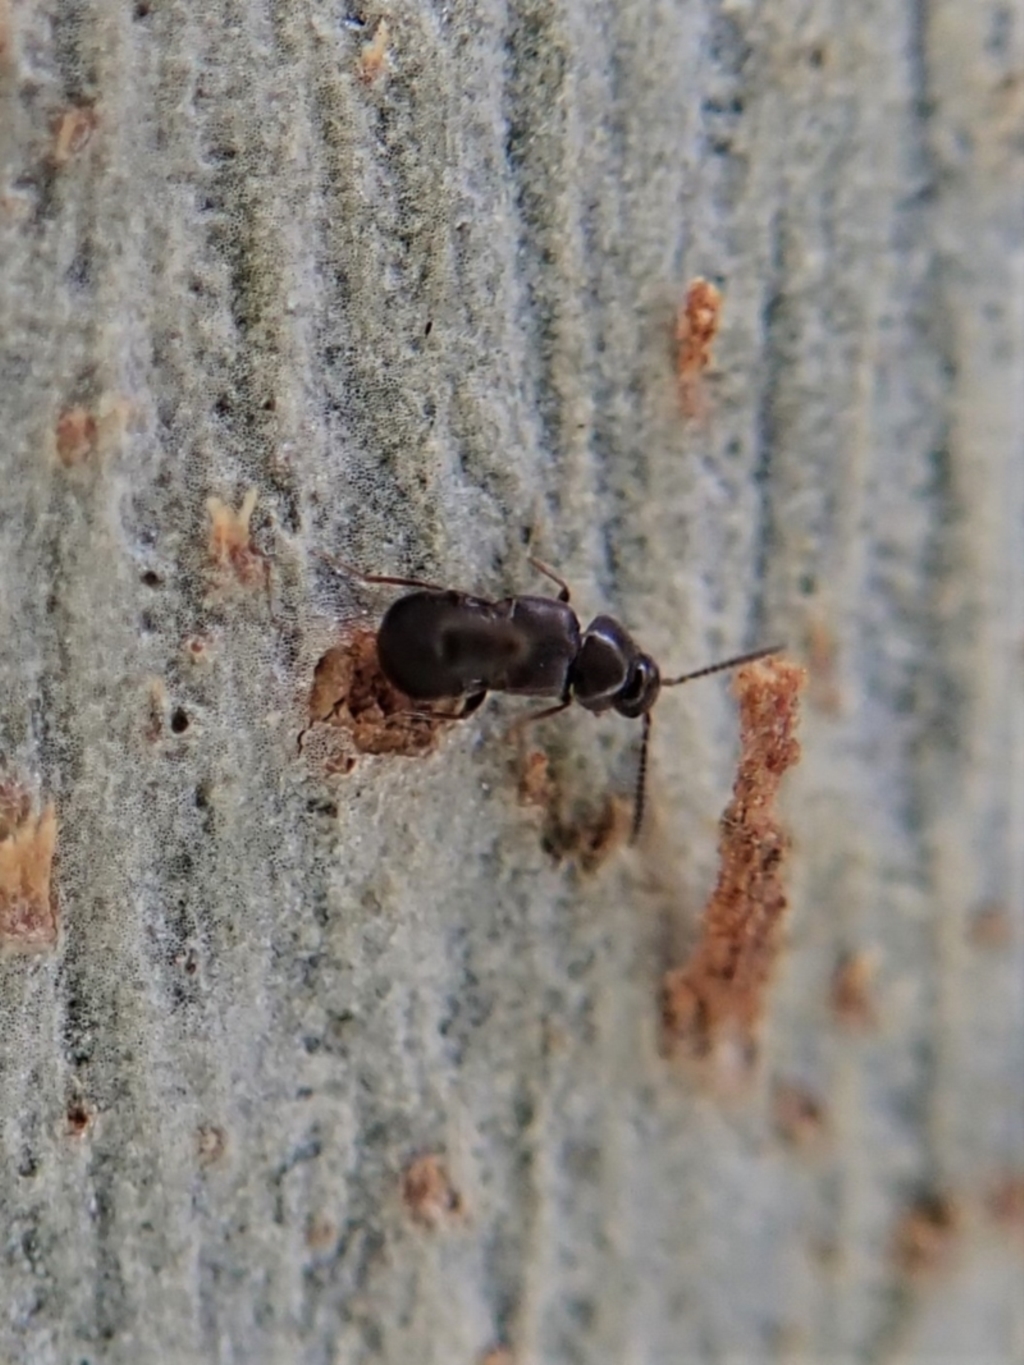 Staphylinidae (family) at Molonglo Valley, ACT - 16 Apr 2021